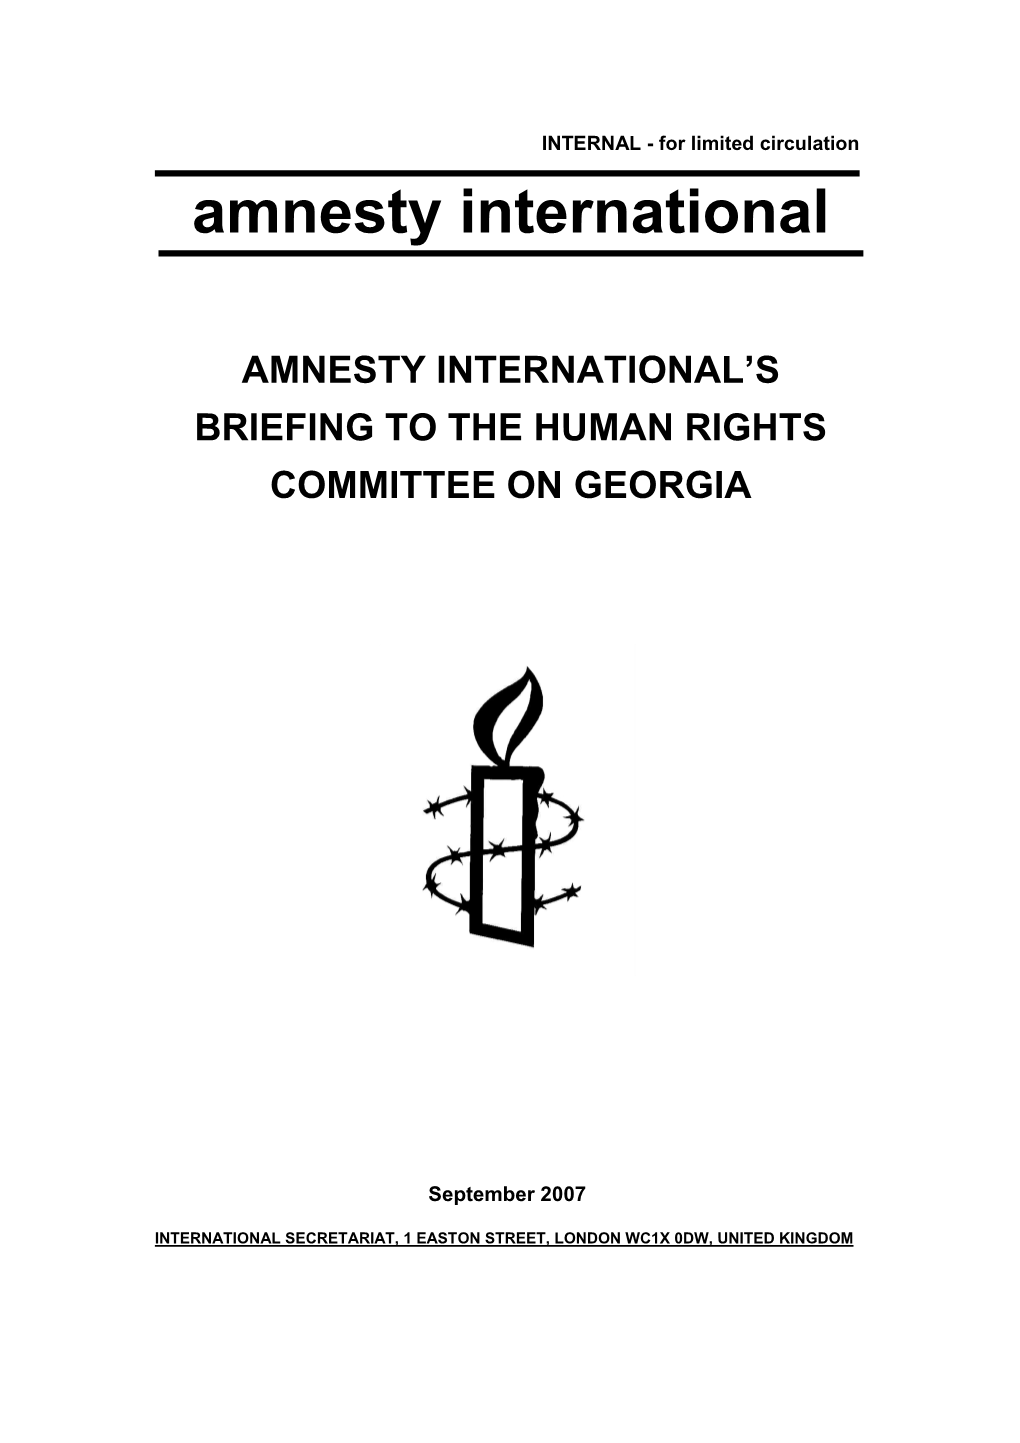 Amnesty International's Briefing to the Human Rights Committee on Georgia